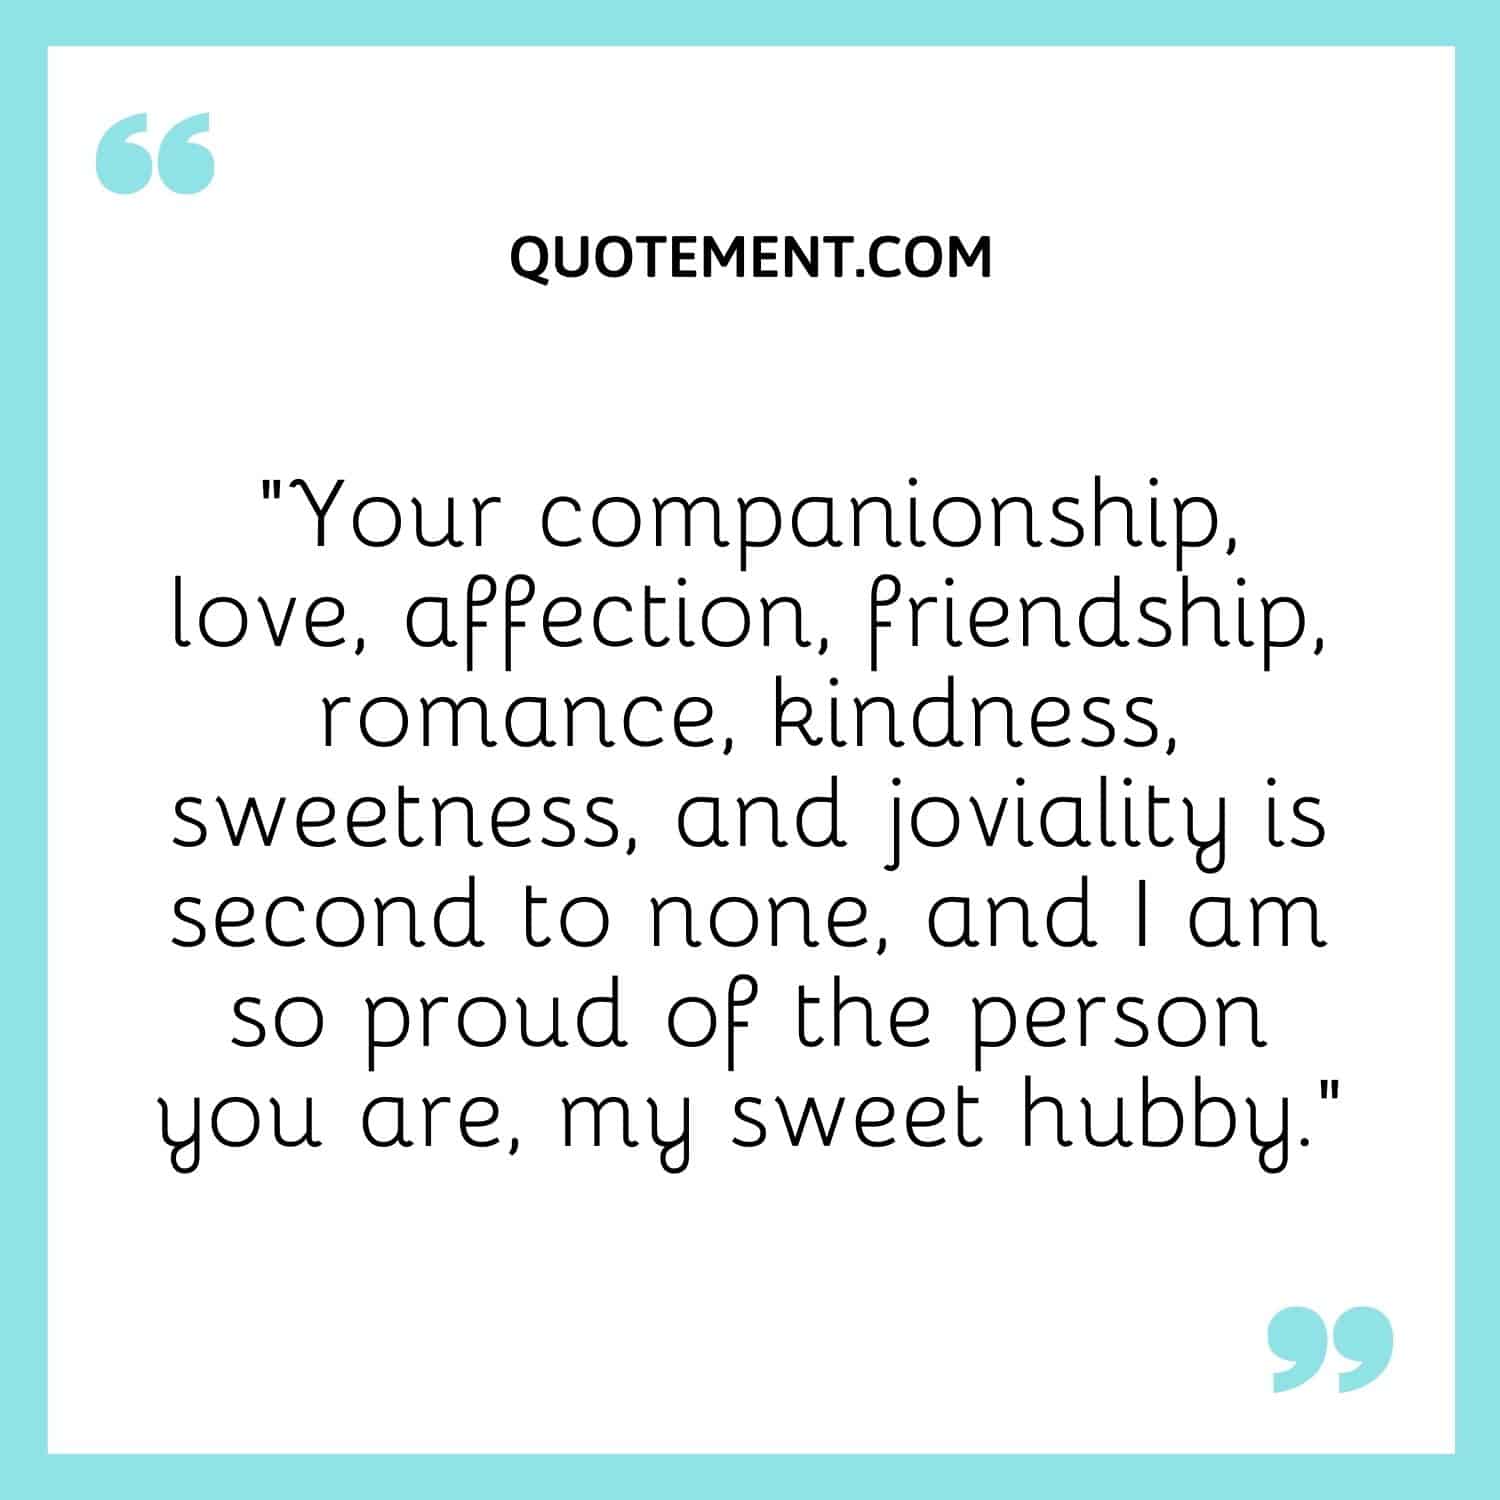 “Your companionship, love, affection, friendship, romance, kindness, sweetness, and joviality is second to none, and I am so proud of the person you are, my sweet hubby.”